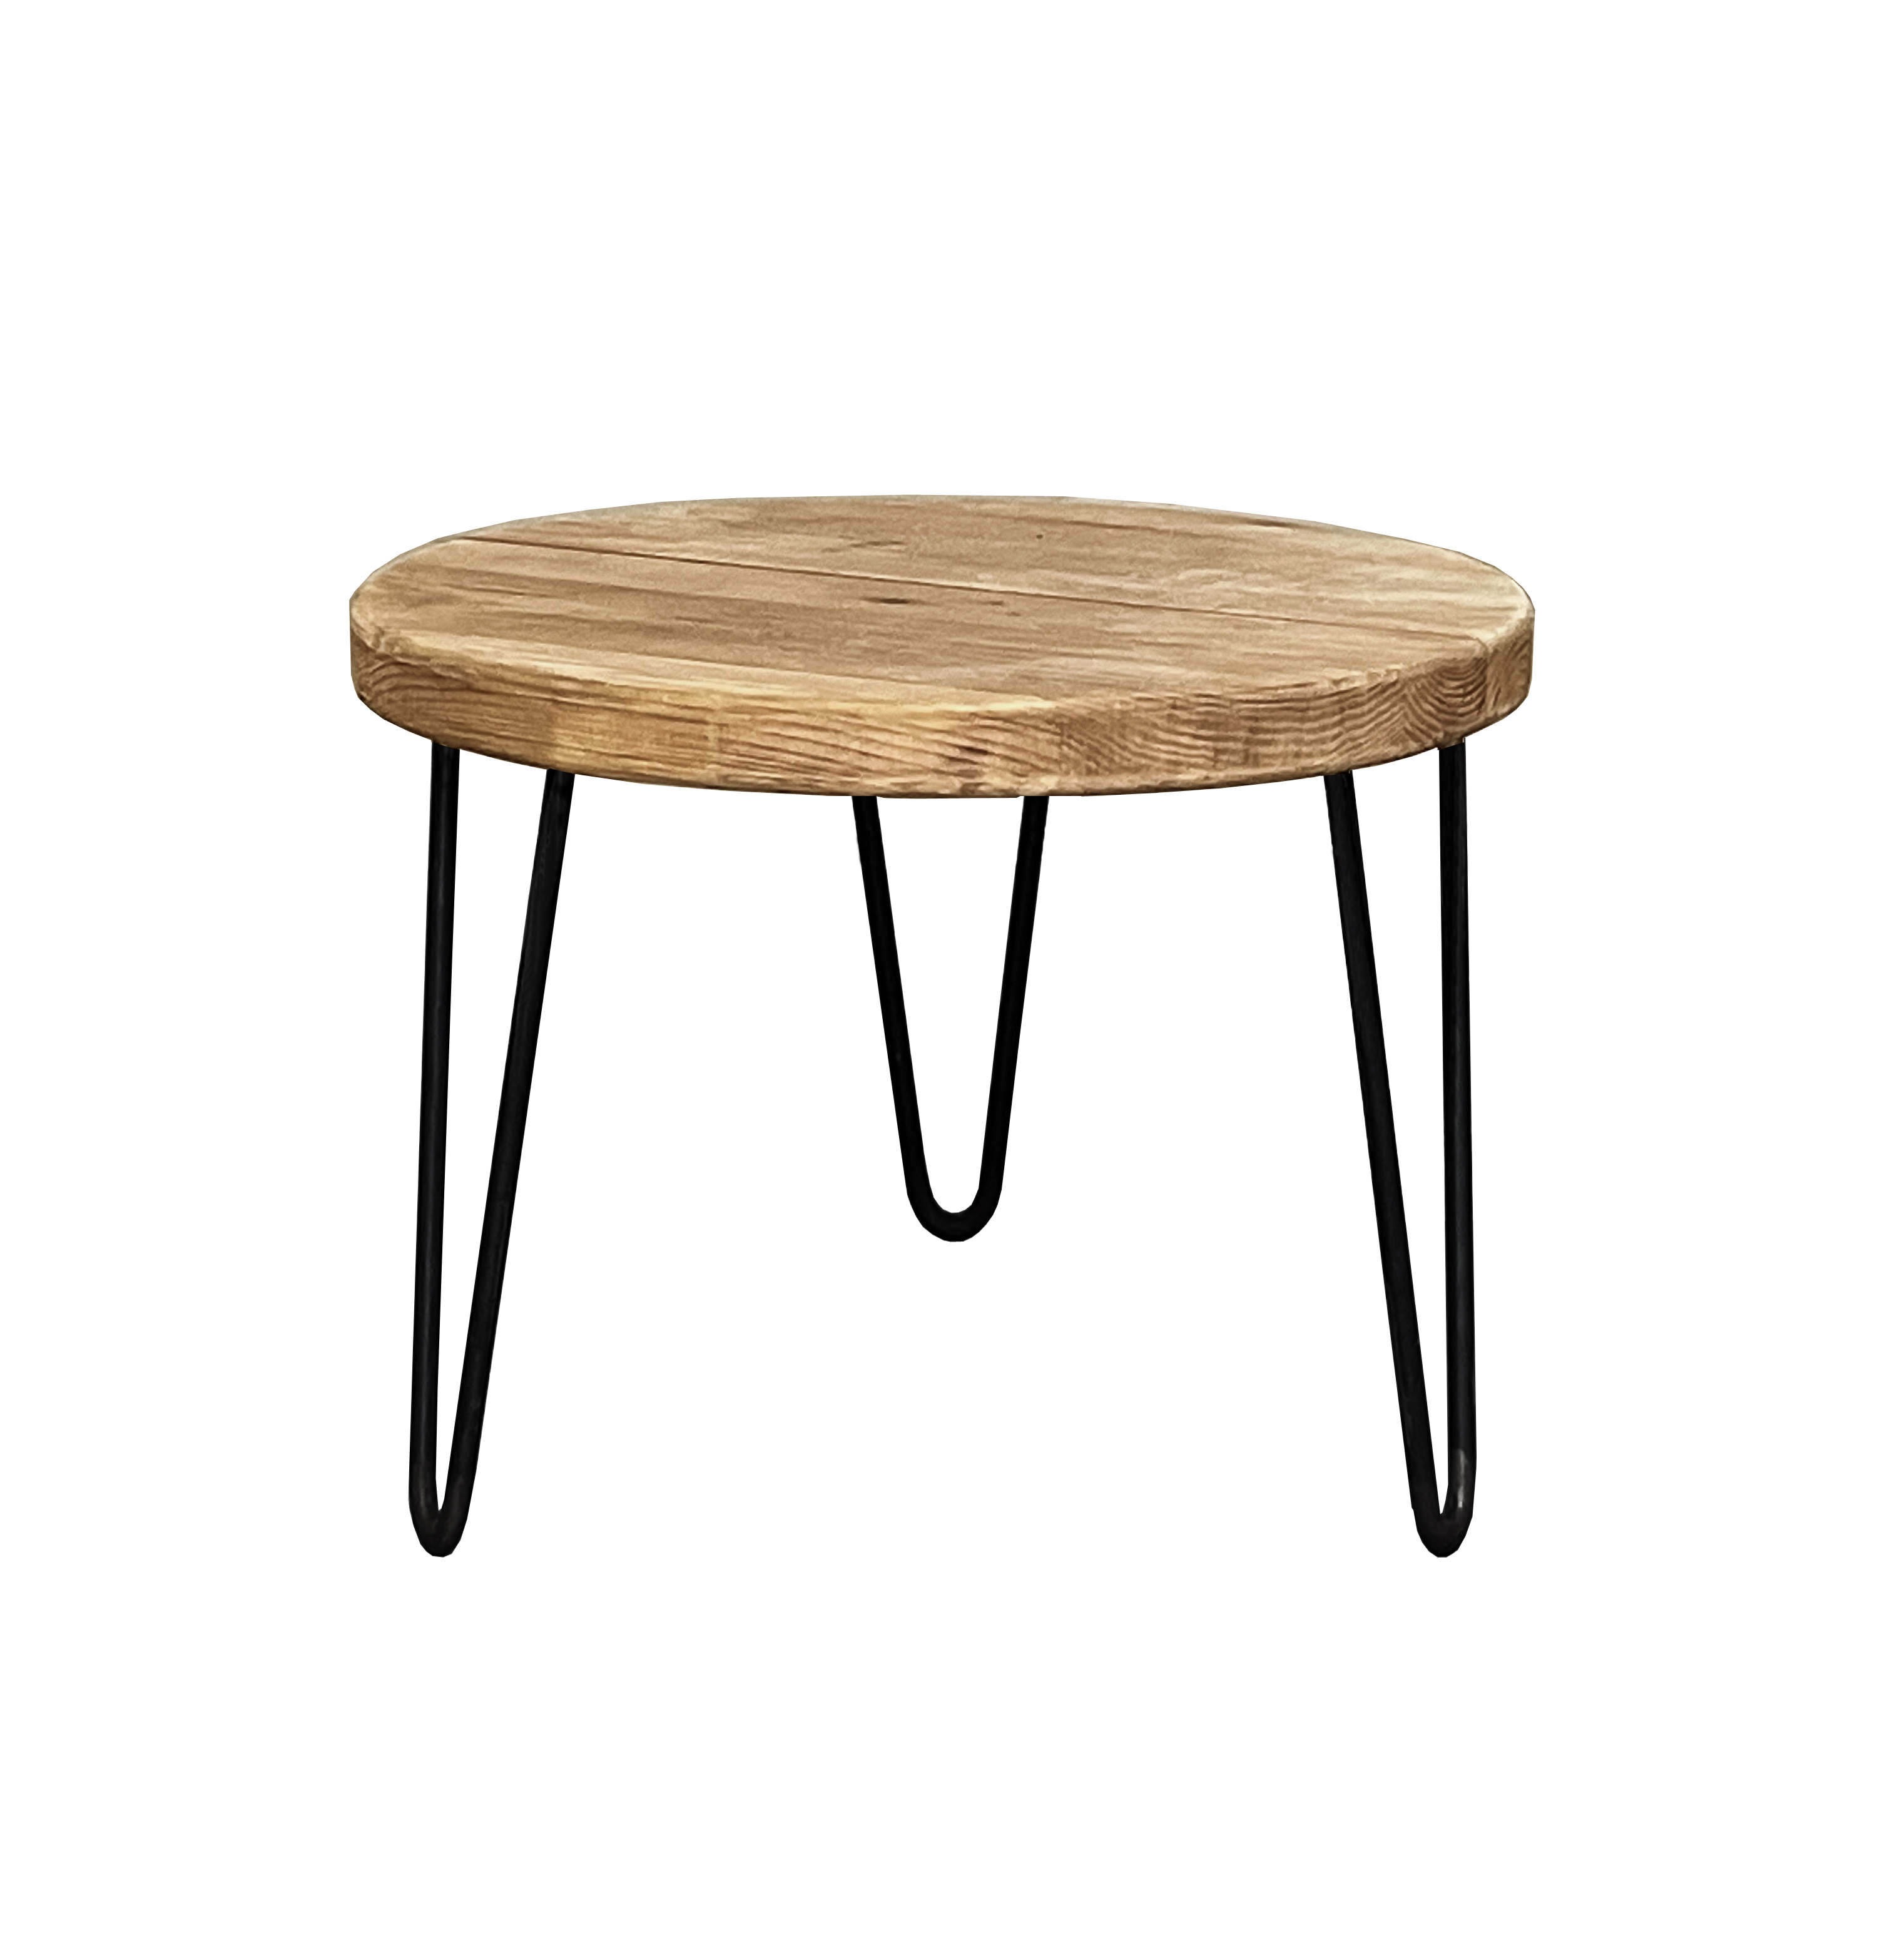 FE012 Rustic side table